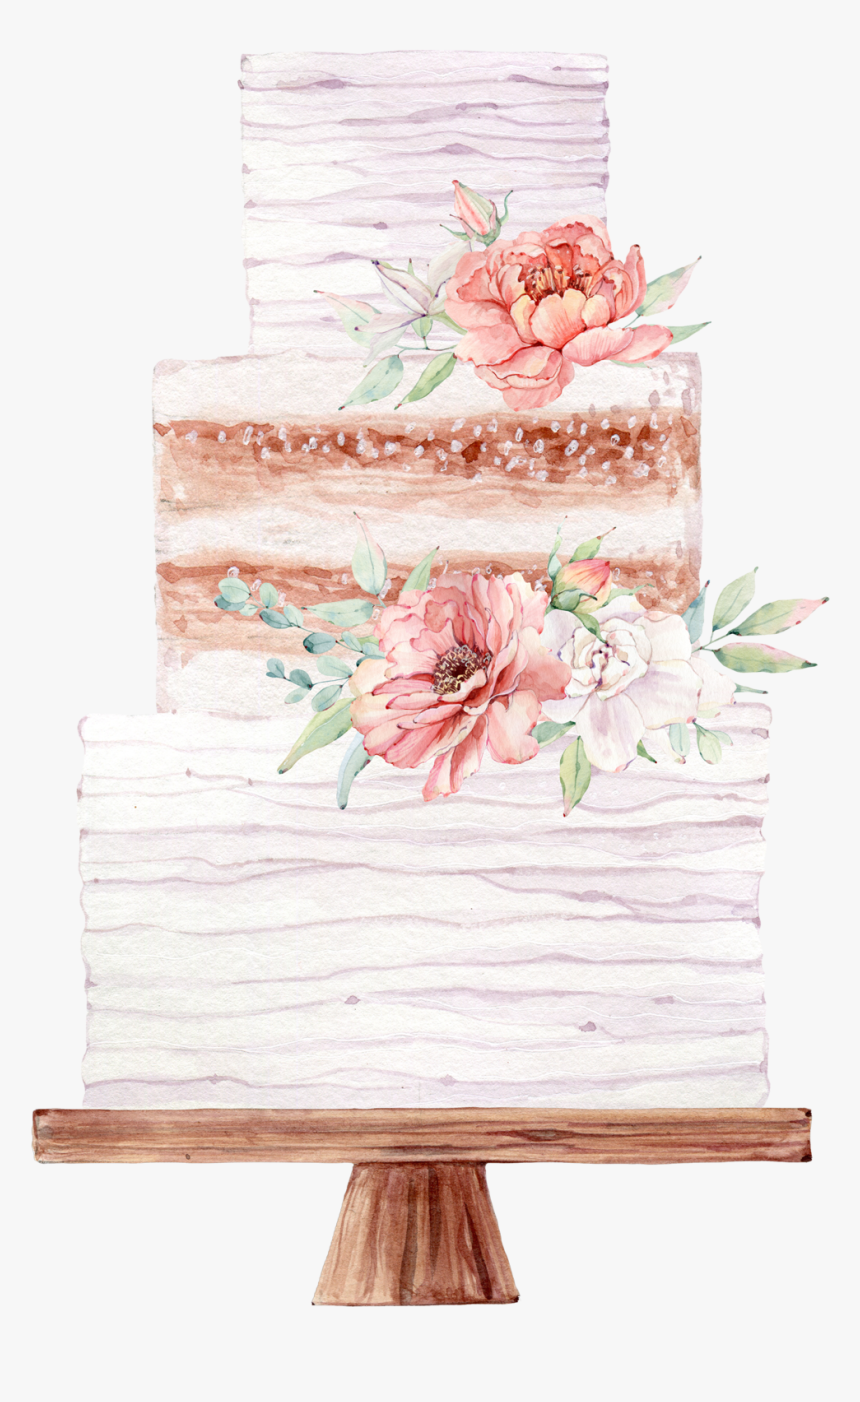 Red and White Wedding Cake for Unforgettable Celebrations